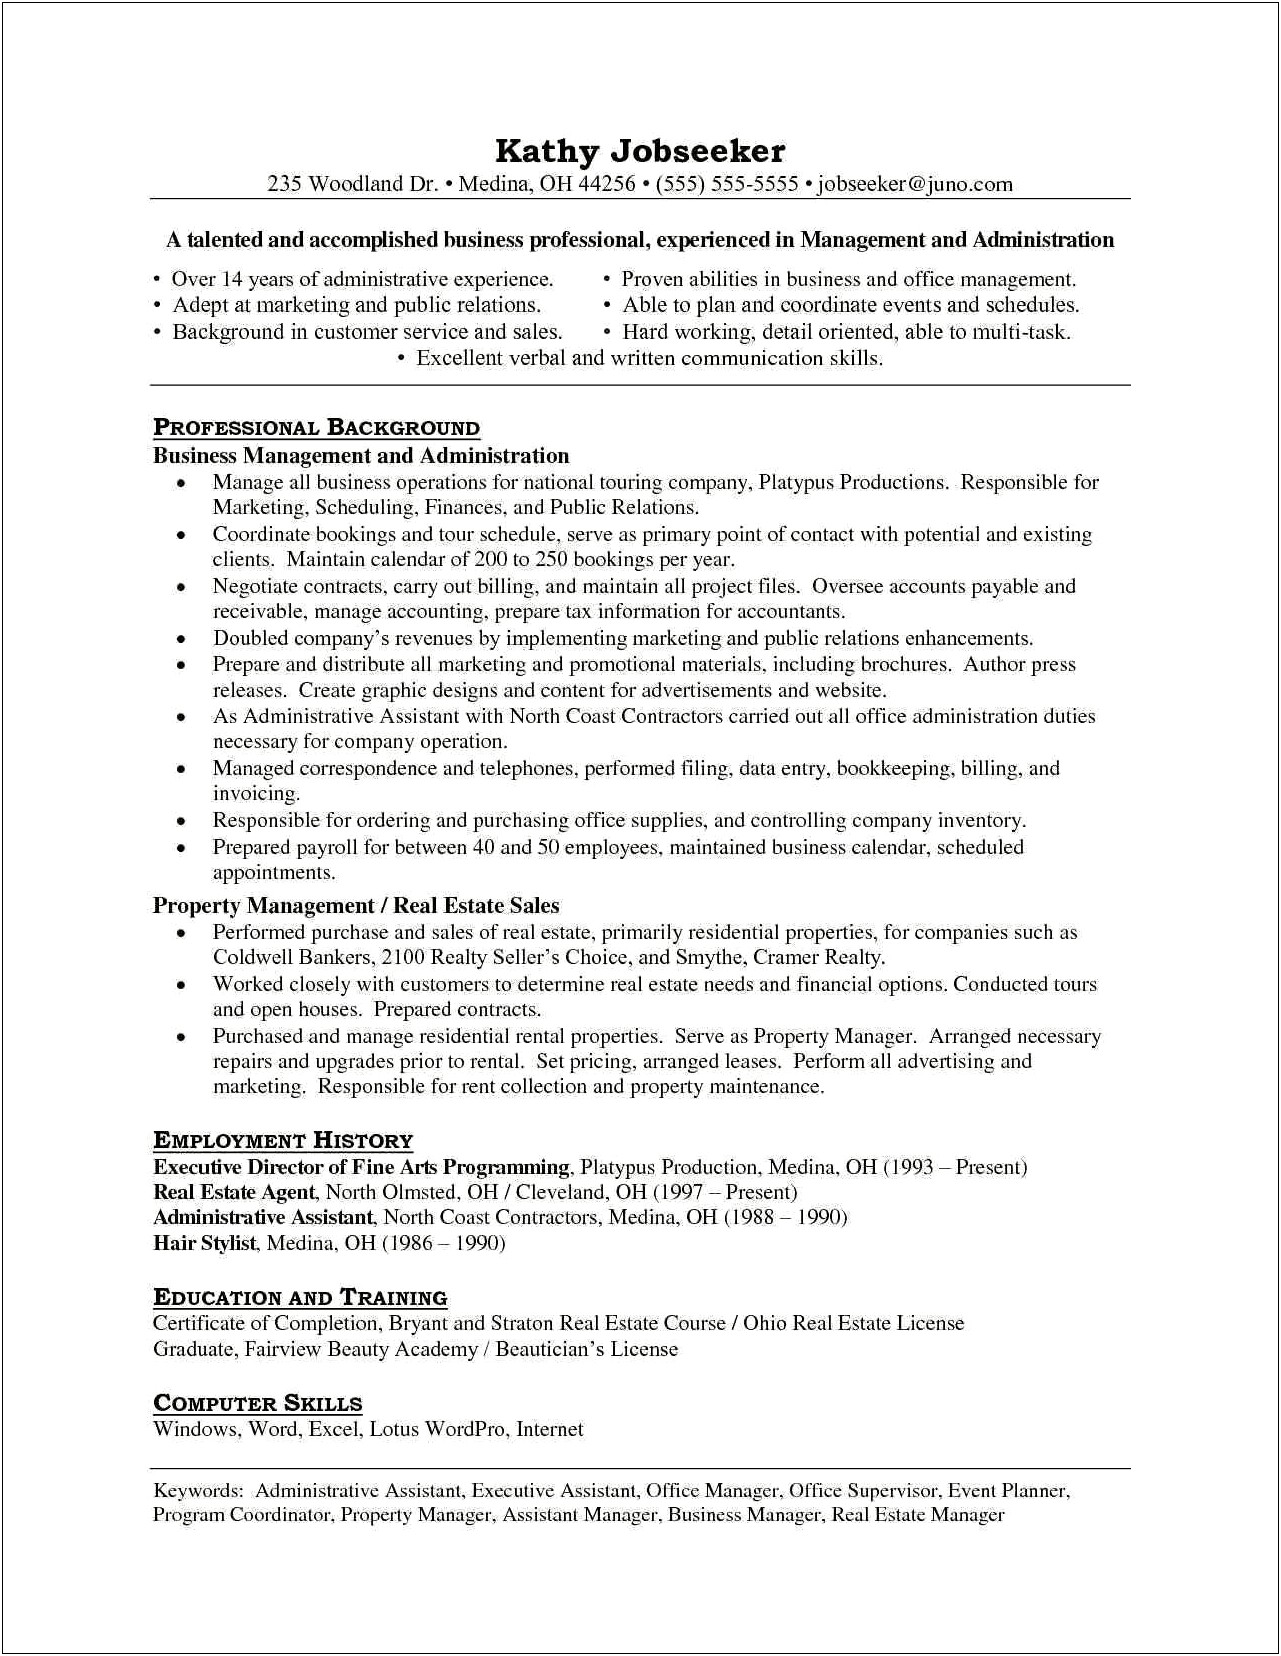 Administrative Assistant Resume Skills And Abilities